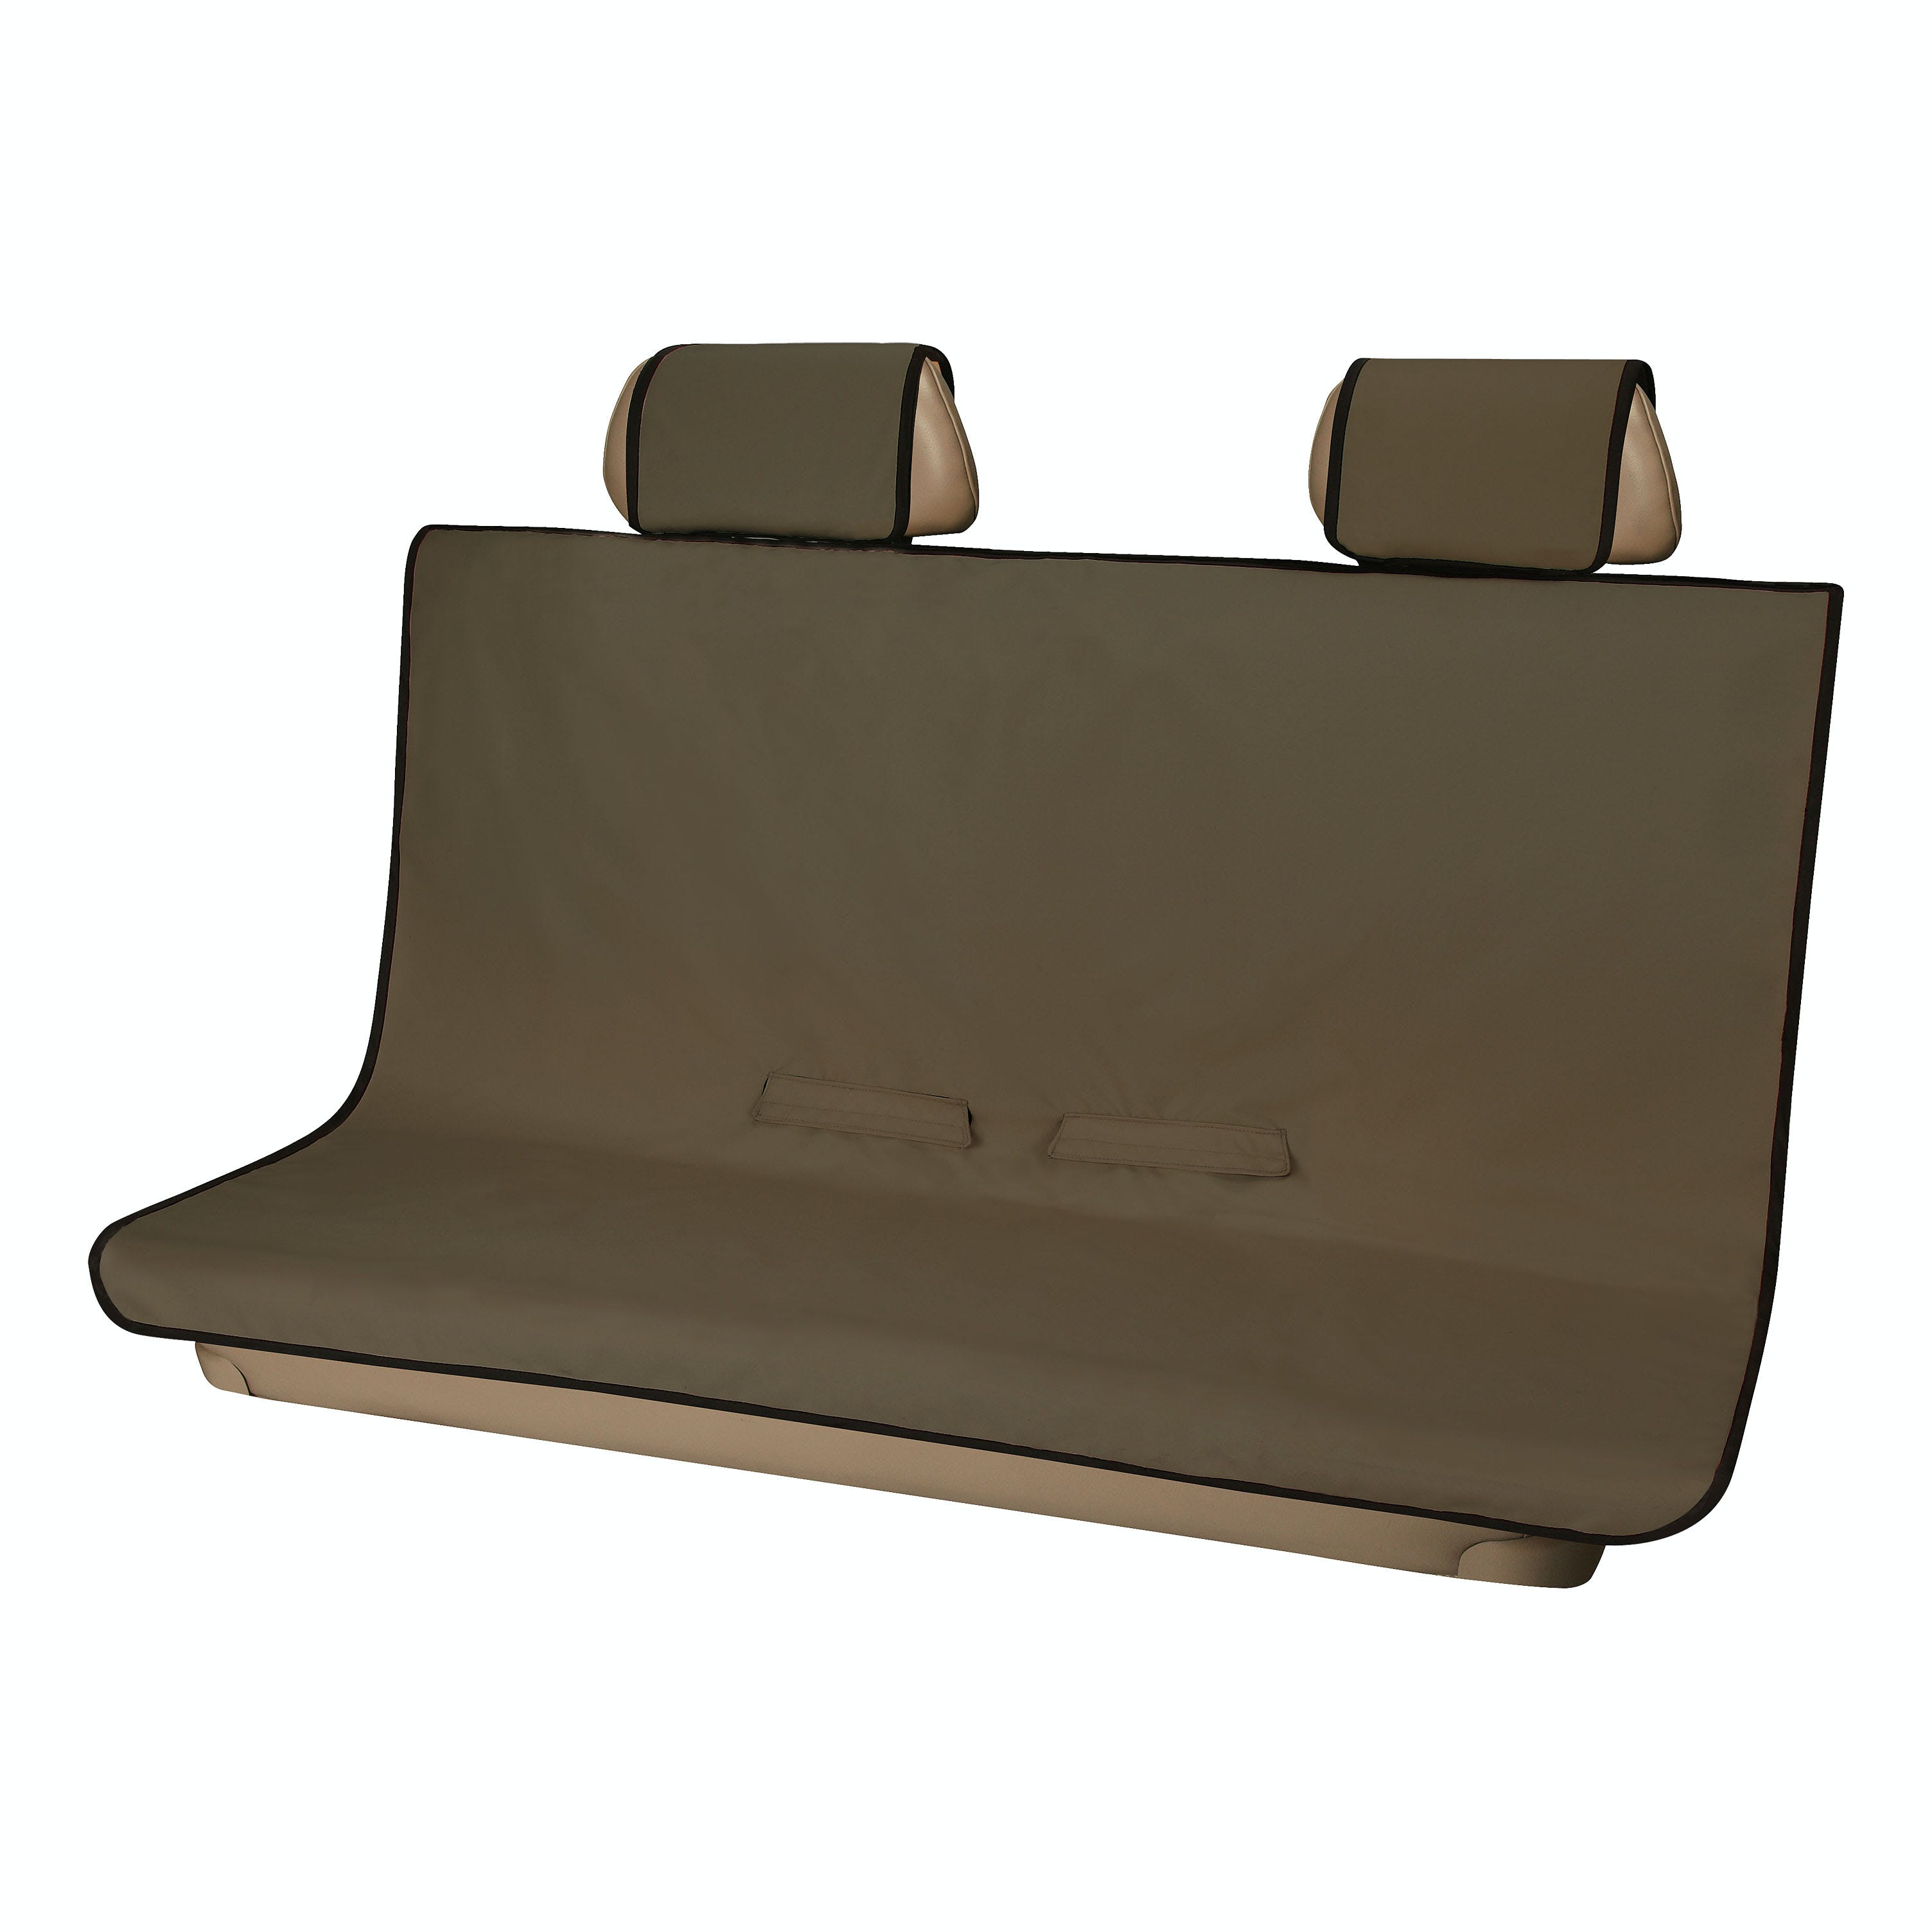 CURT 18512 Seat Defender 58 x 55 Removable Waterproof Brown Bench Seat Cover